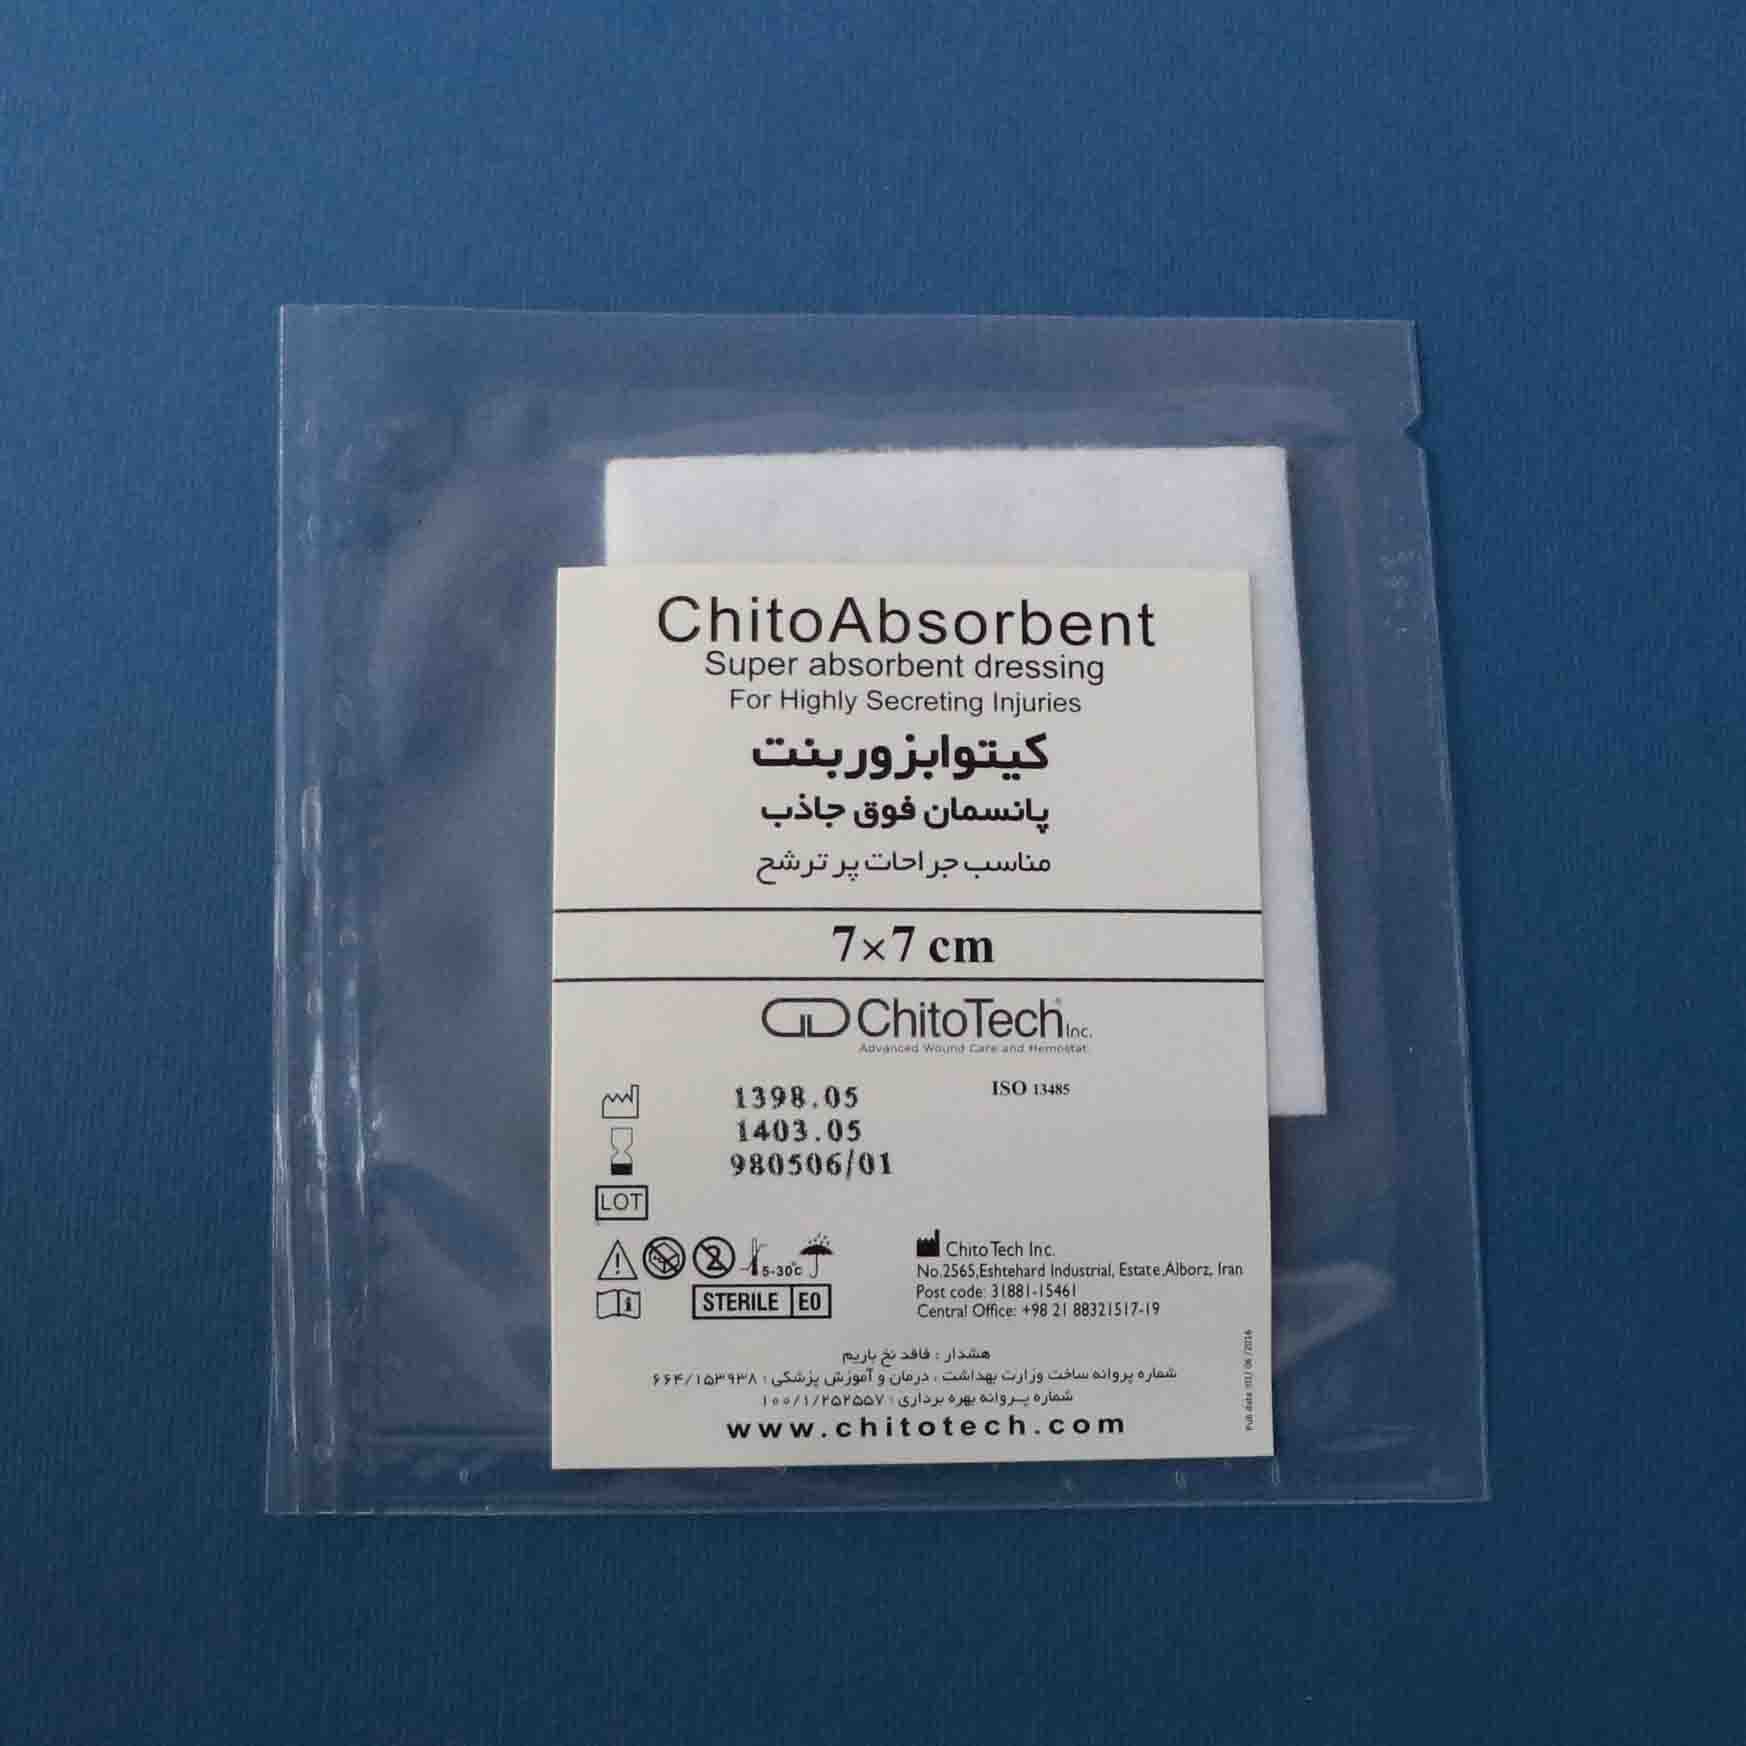 ChitoAbsorbent